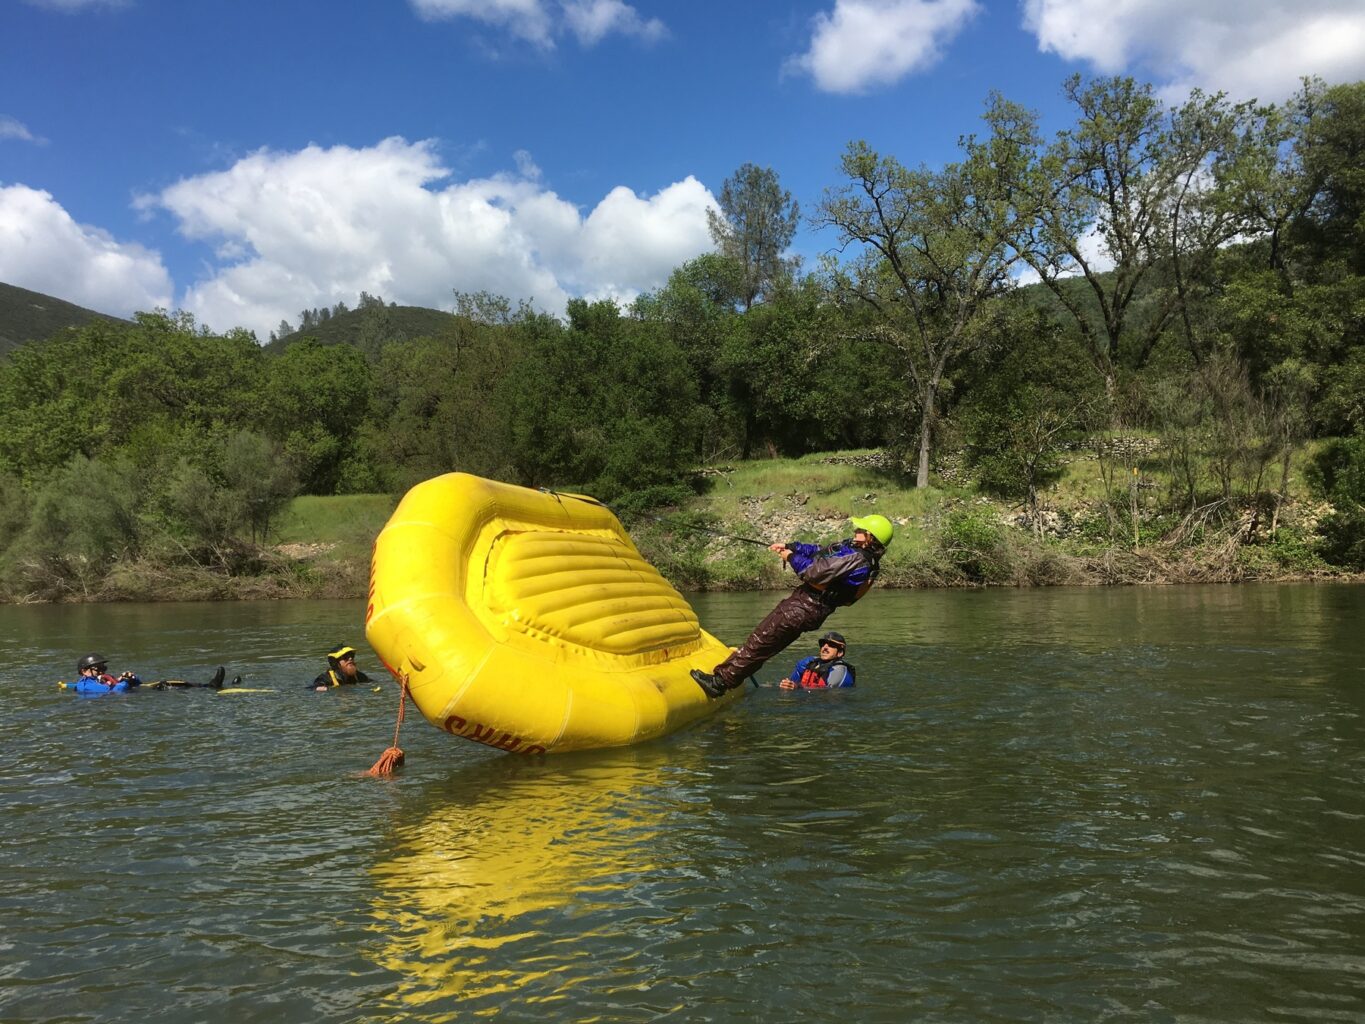 A raft guide in training flips a yellow raft on the South Fork of the American River.